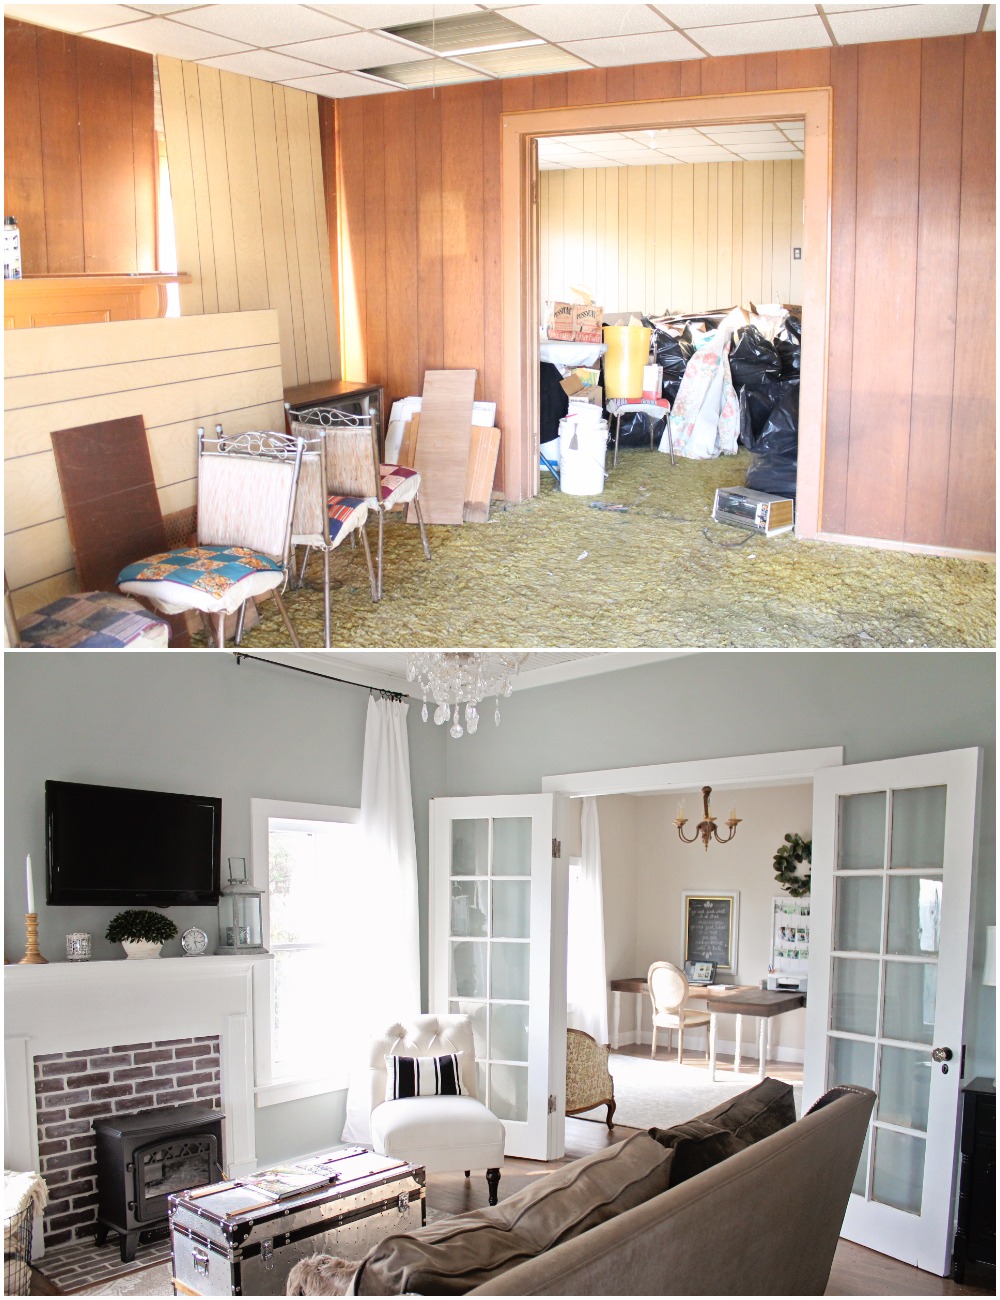 Elizabeth Burns Design  Budget-Friendly Fixer Upper Farmhouse Before and After House Flip - DIY Living Room with Faux Fireplace and French Doors - Sherwin Williams Magnetic Gray (1).jpg